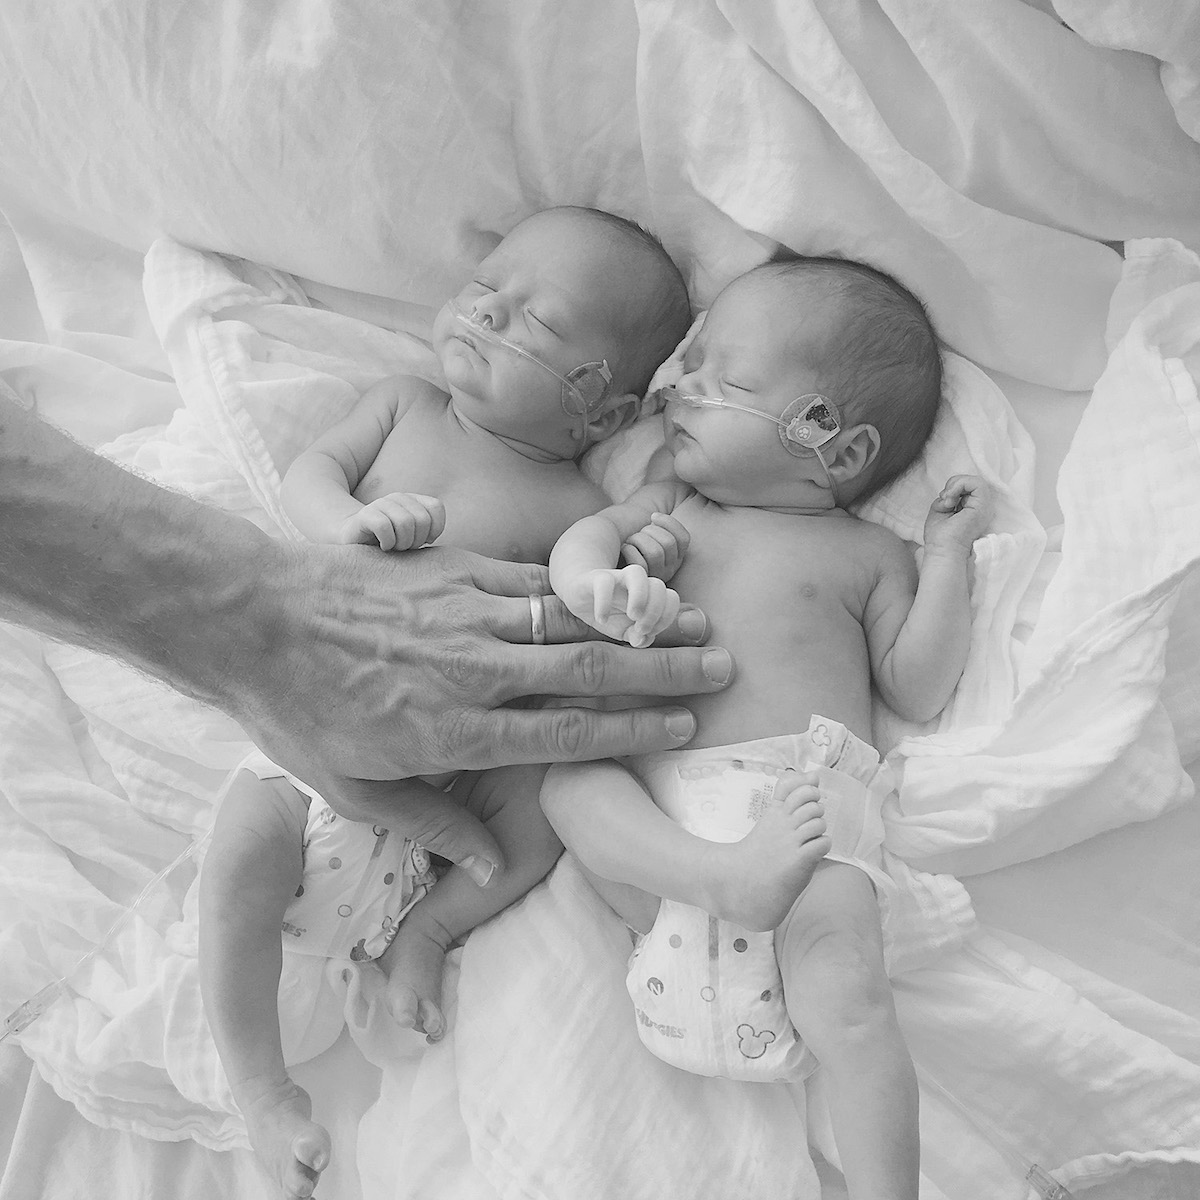 Photo of baby twins on oxygen